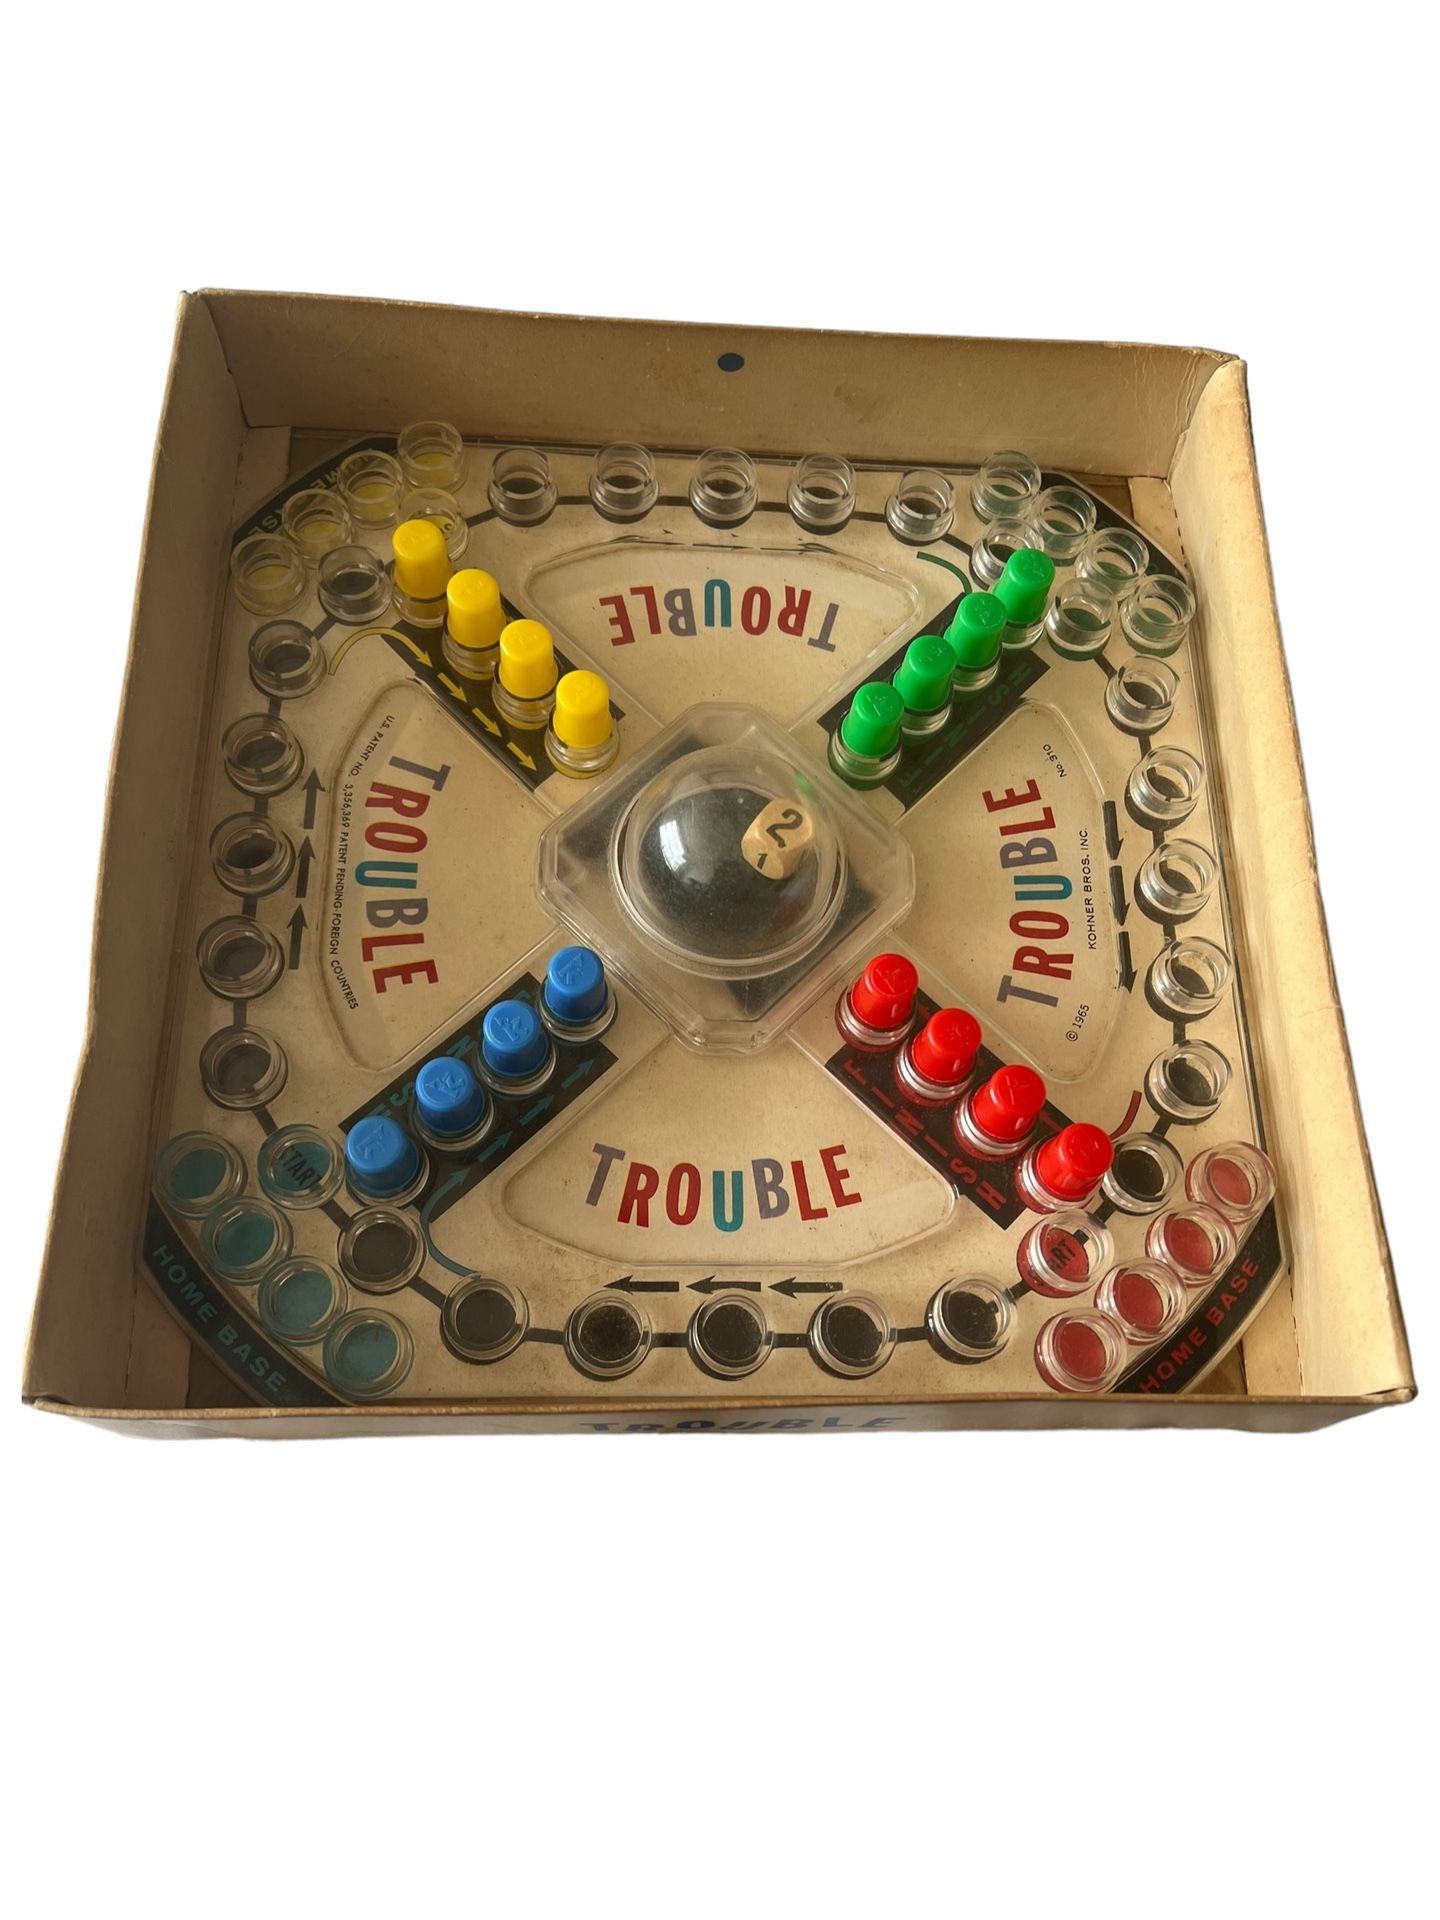 TROUBLE Vintage 1965 Board Game  Pop-O-Matic No. 310 Kohner Bros  Complete Box  Experience the classic game of strategy and skill with this vintage 19